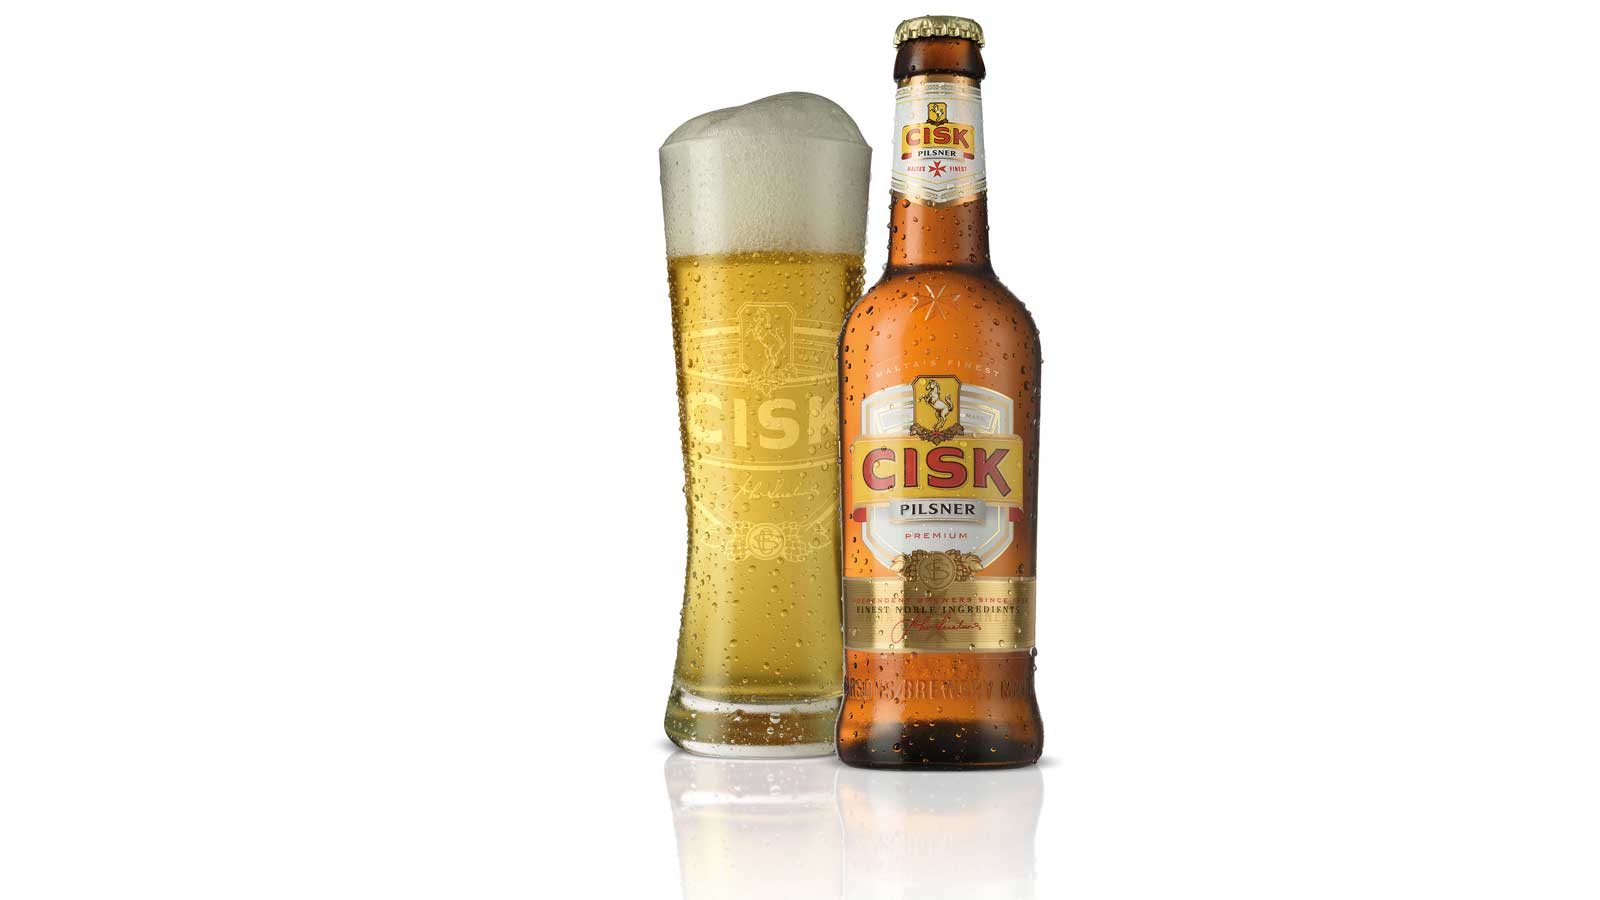 Introducing Cisk Pilsner: a legend to be savoured by those who seek the best